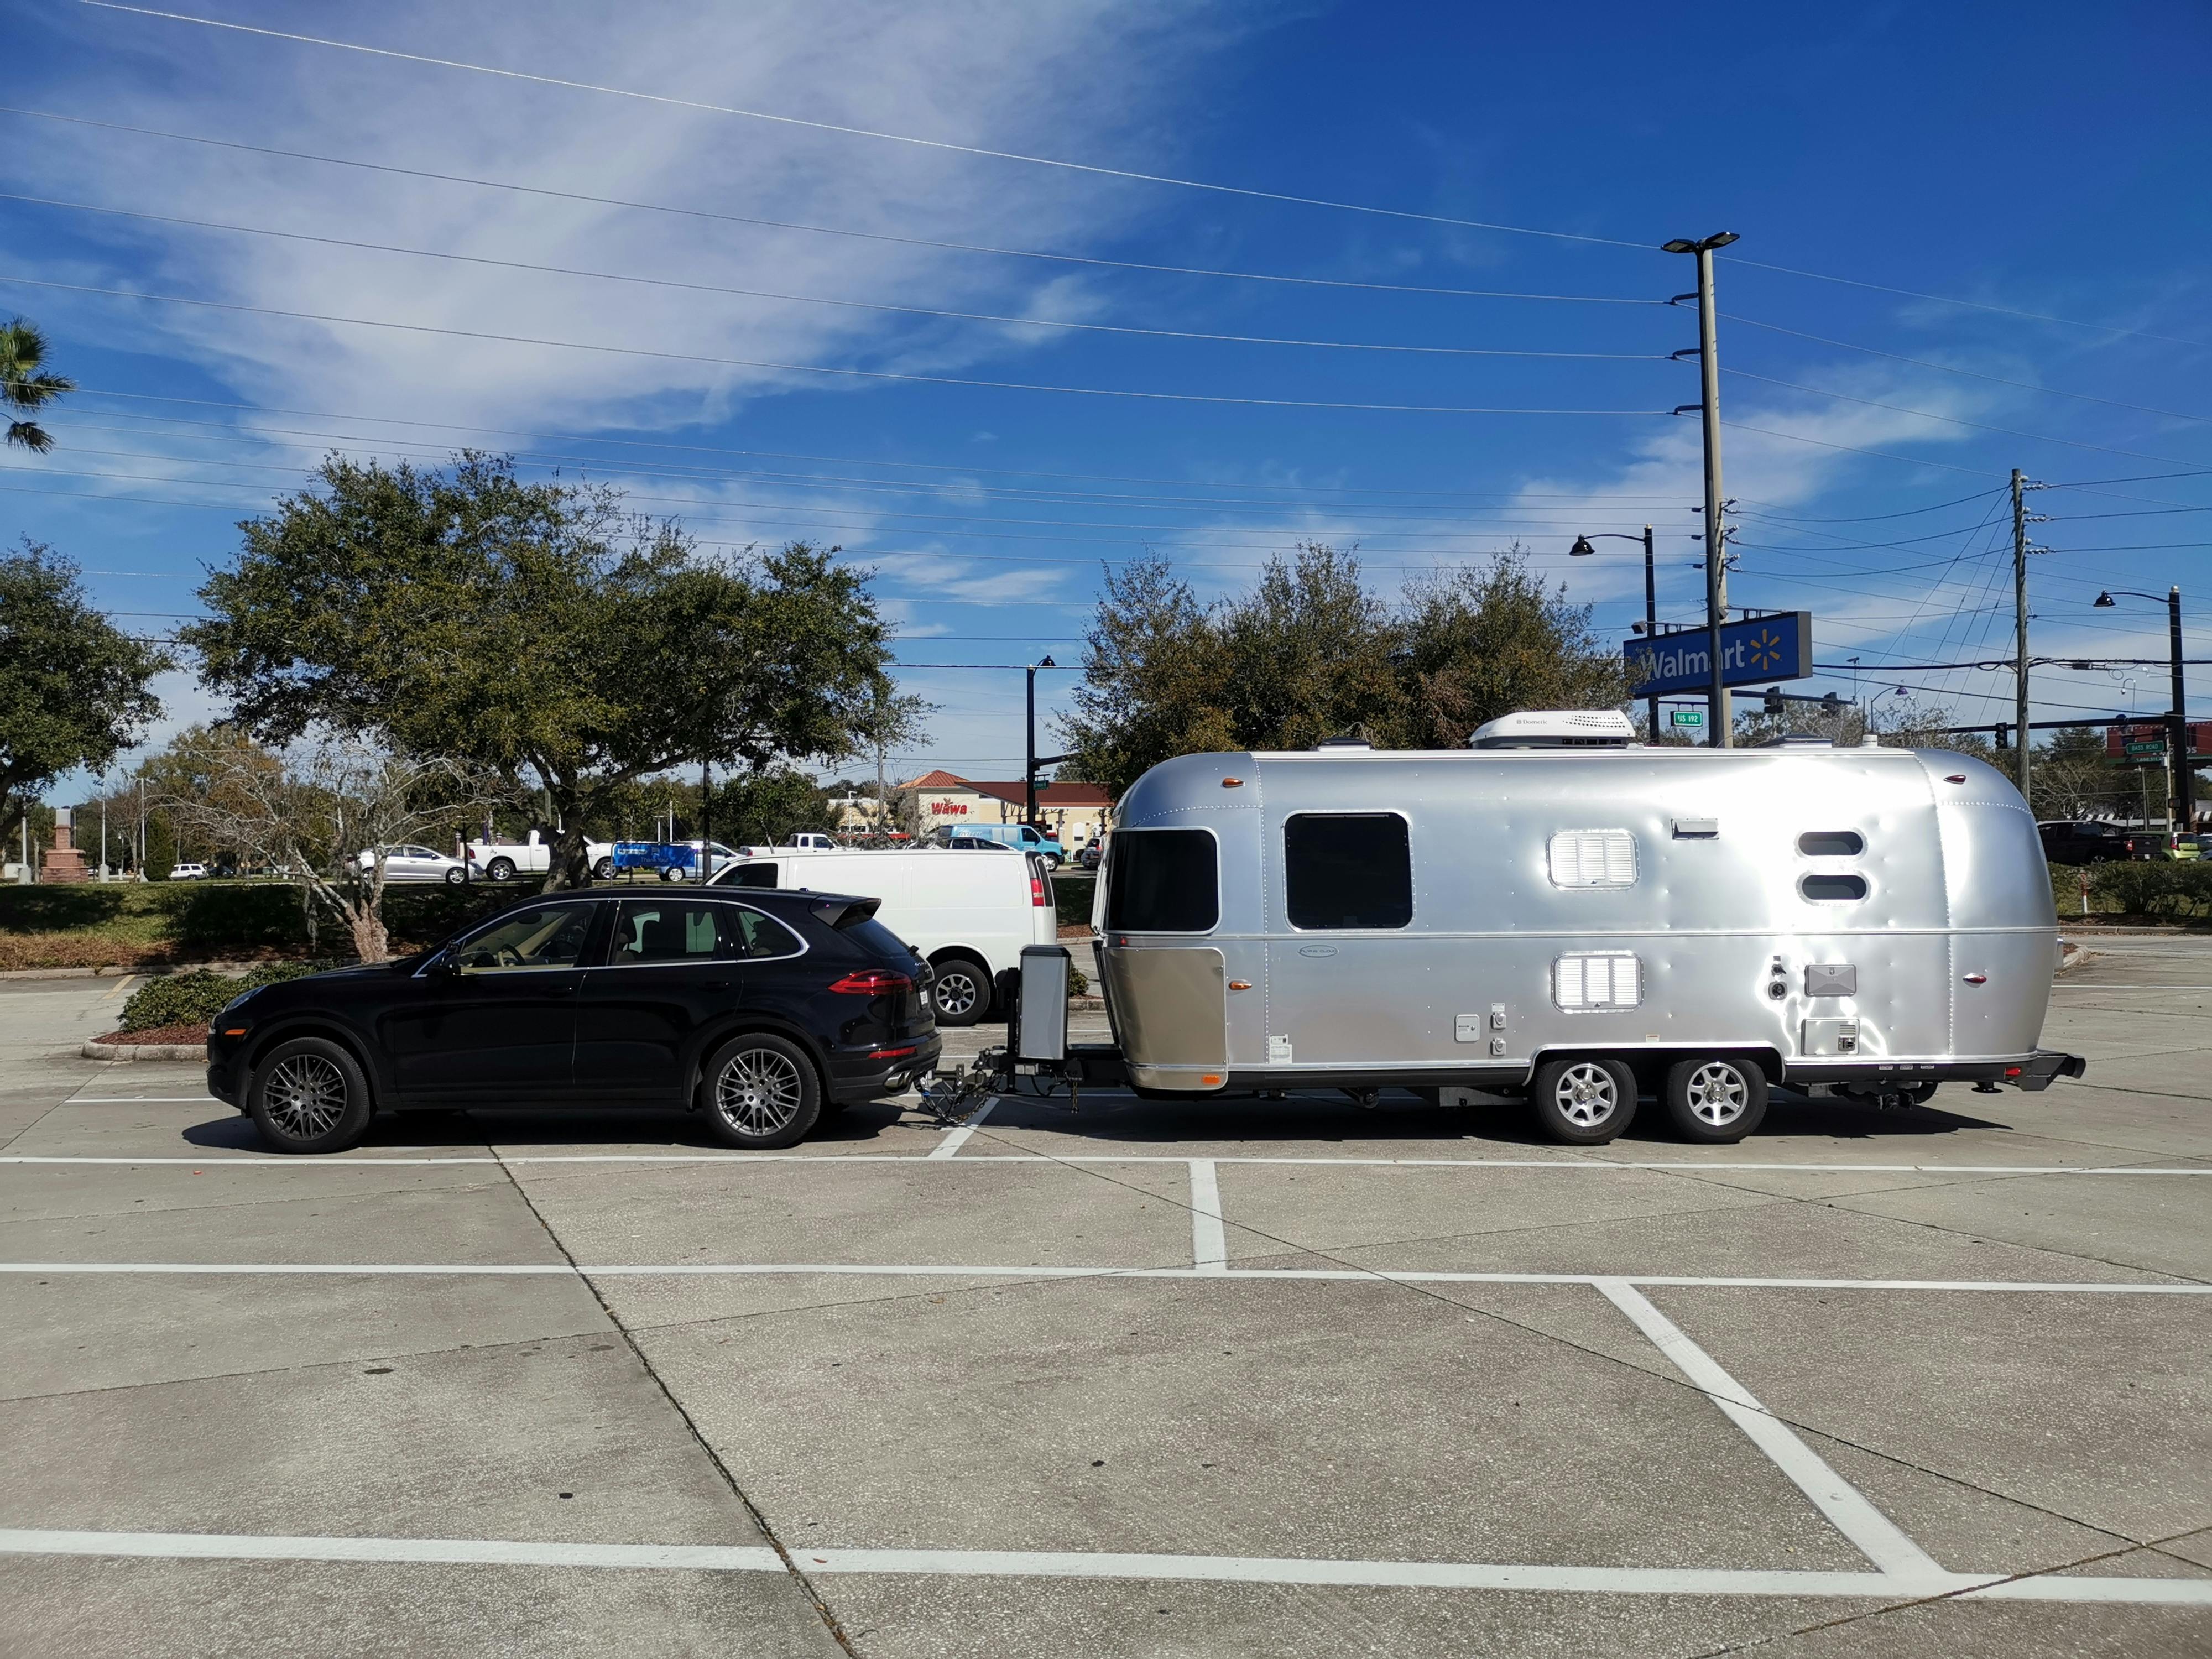 A truck towing an airstream RV parked in a Walmart parking lot